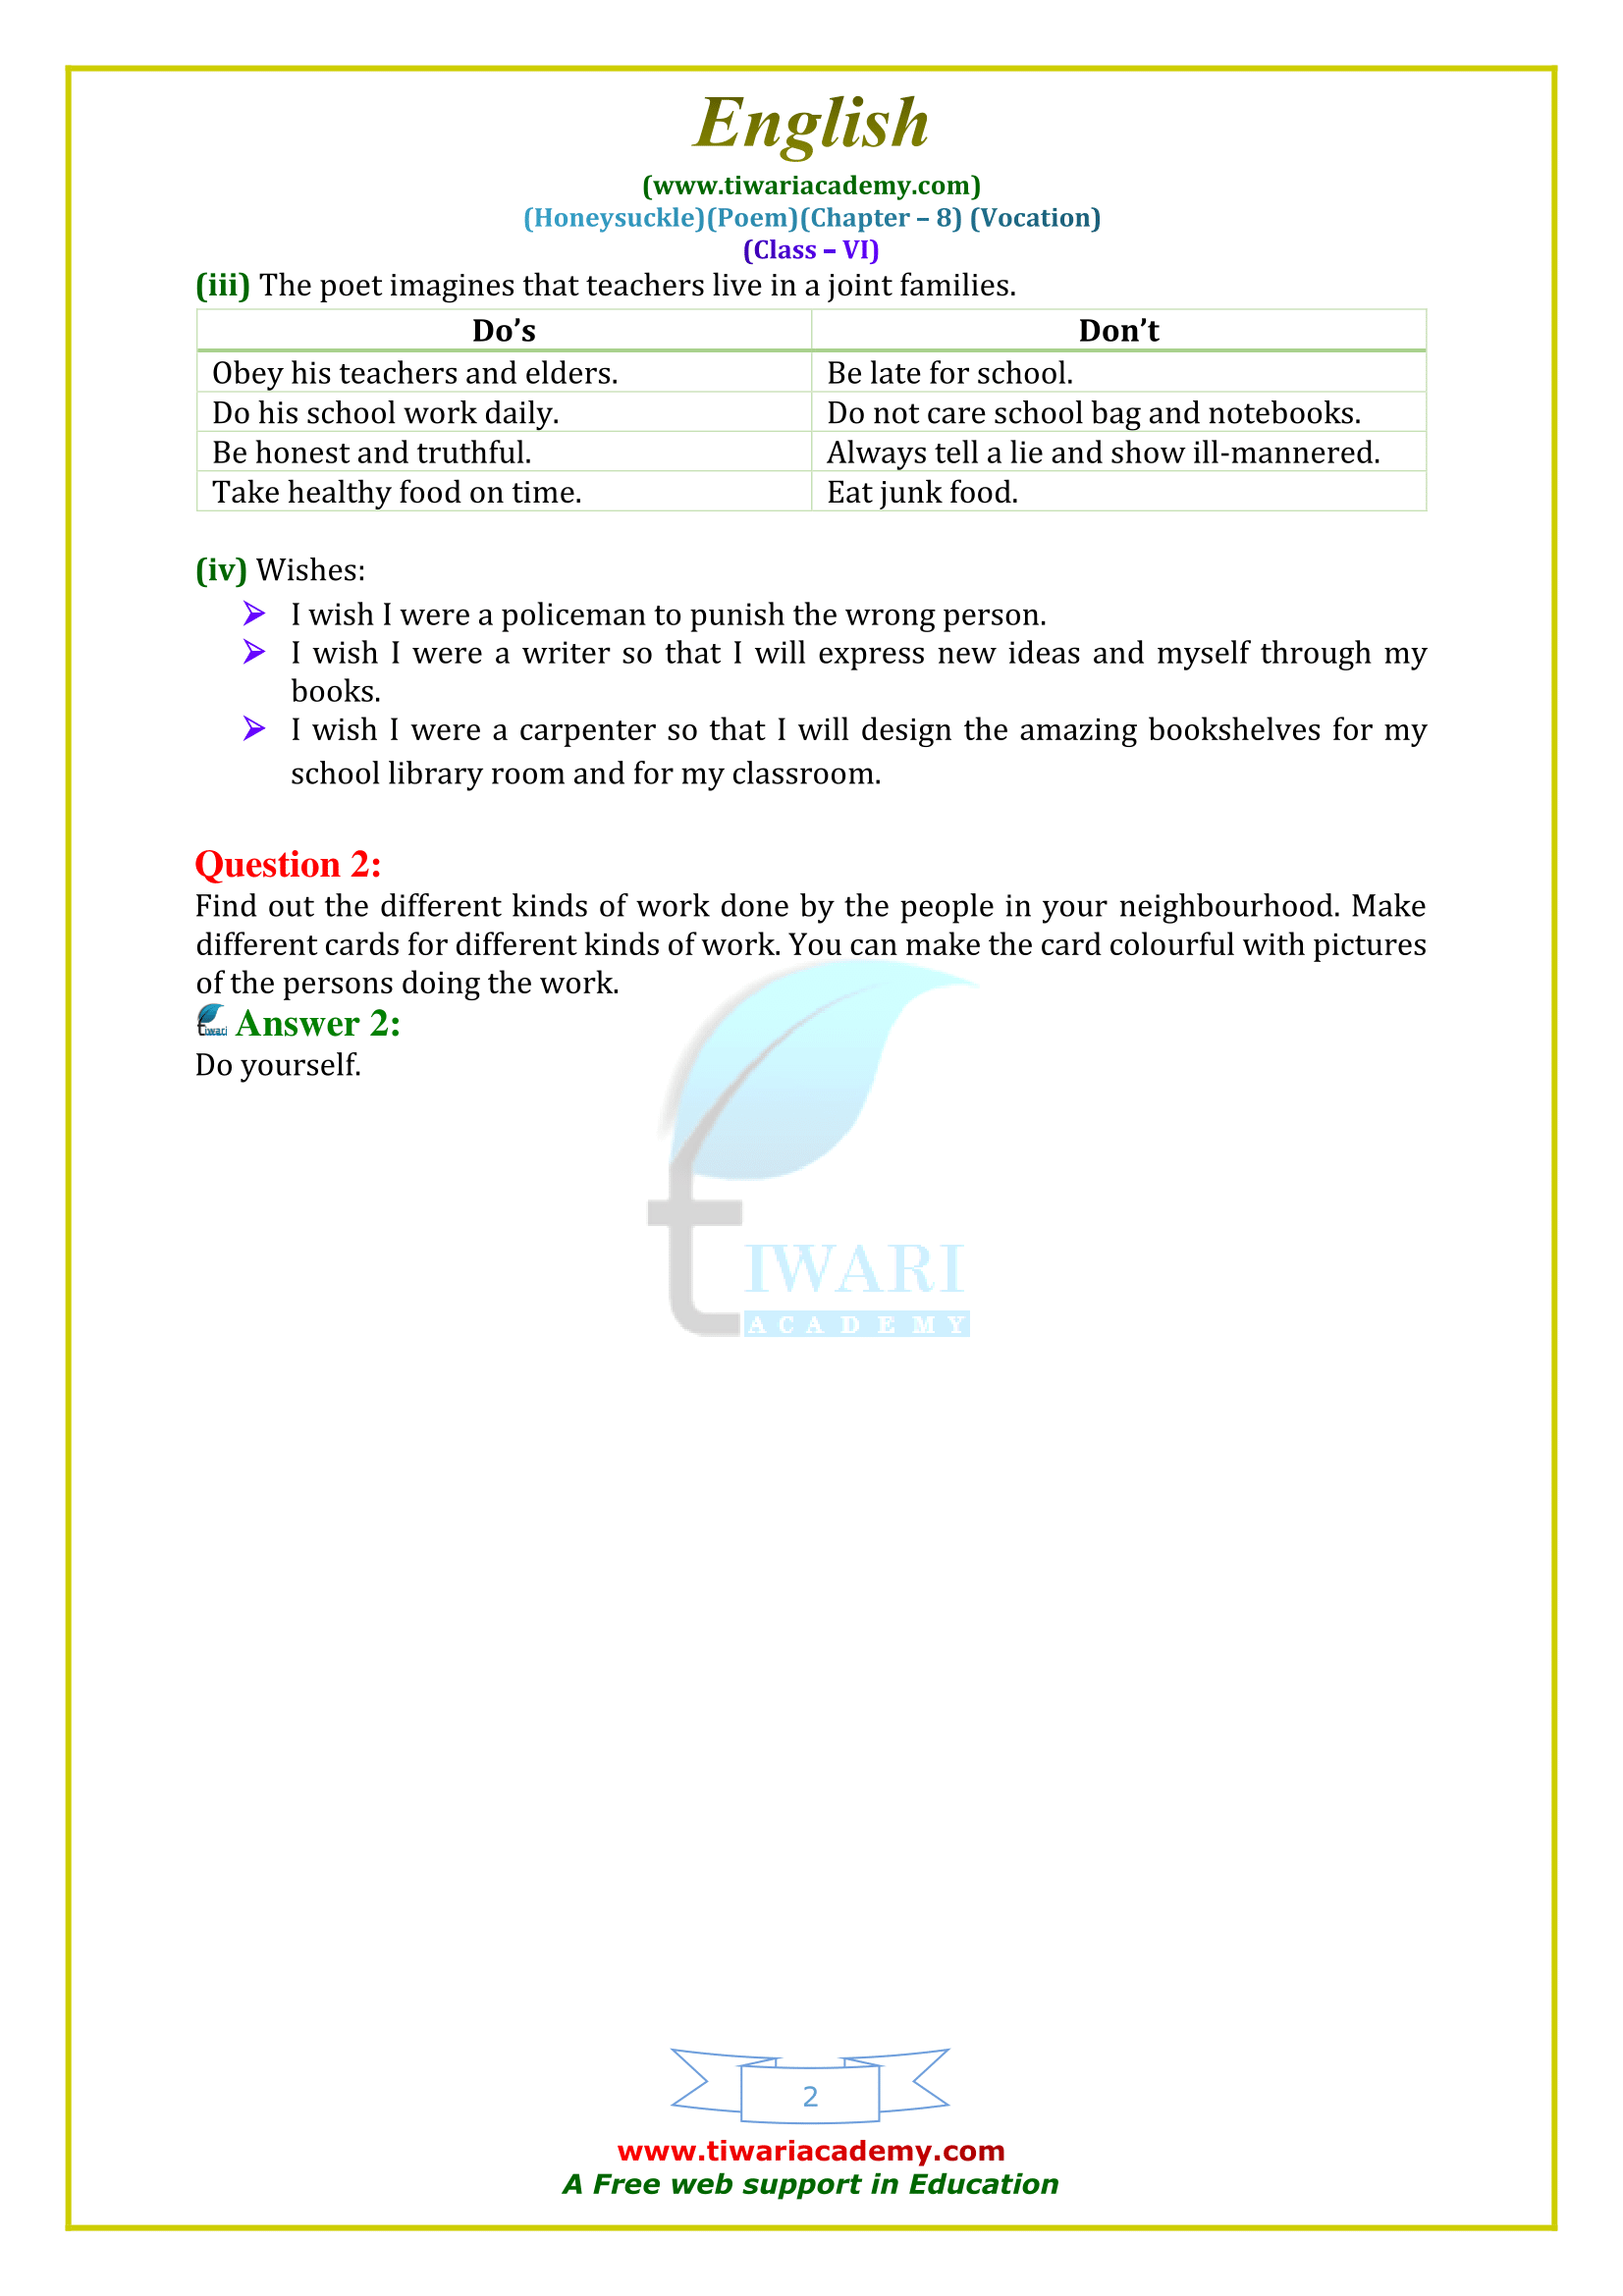 NCERT Solutions for Class 6 English Honeysuckle Poem 8 Vocation